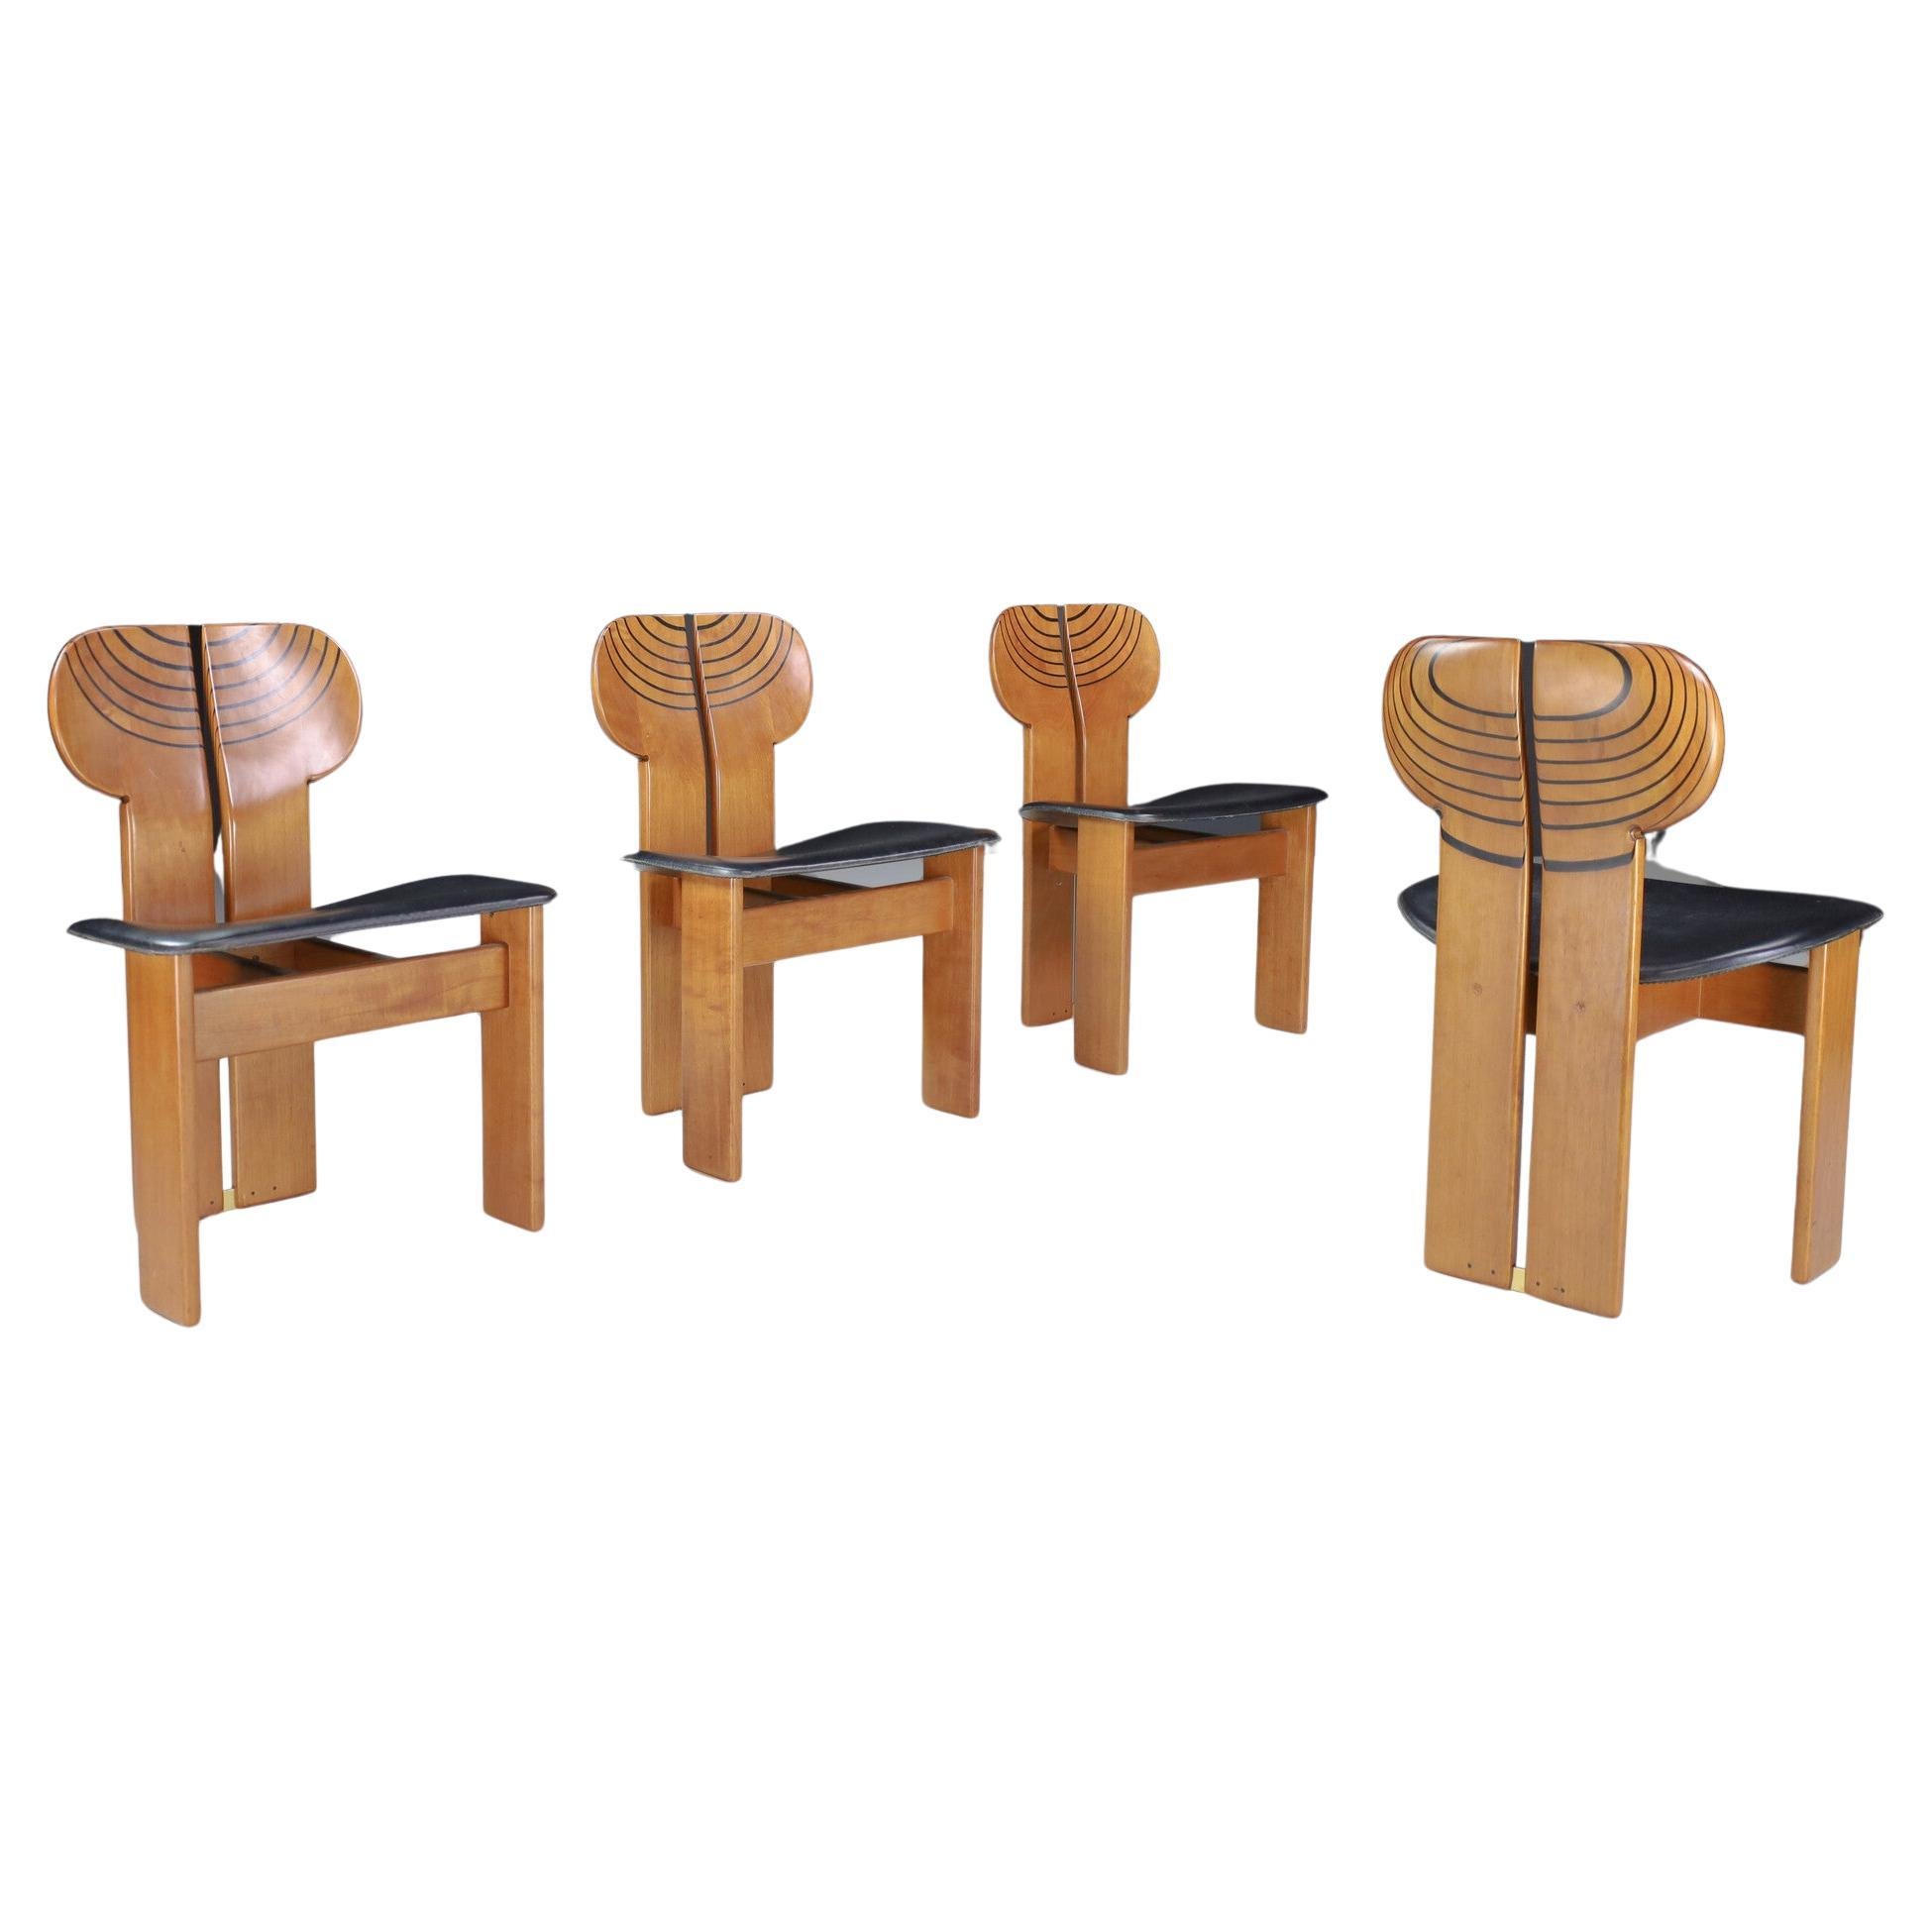 Afra & Tobia Scarpa "Africa" dining chairs for Maxalto, 1975 For Sale